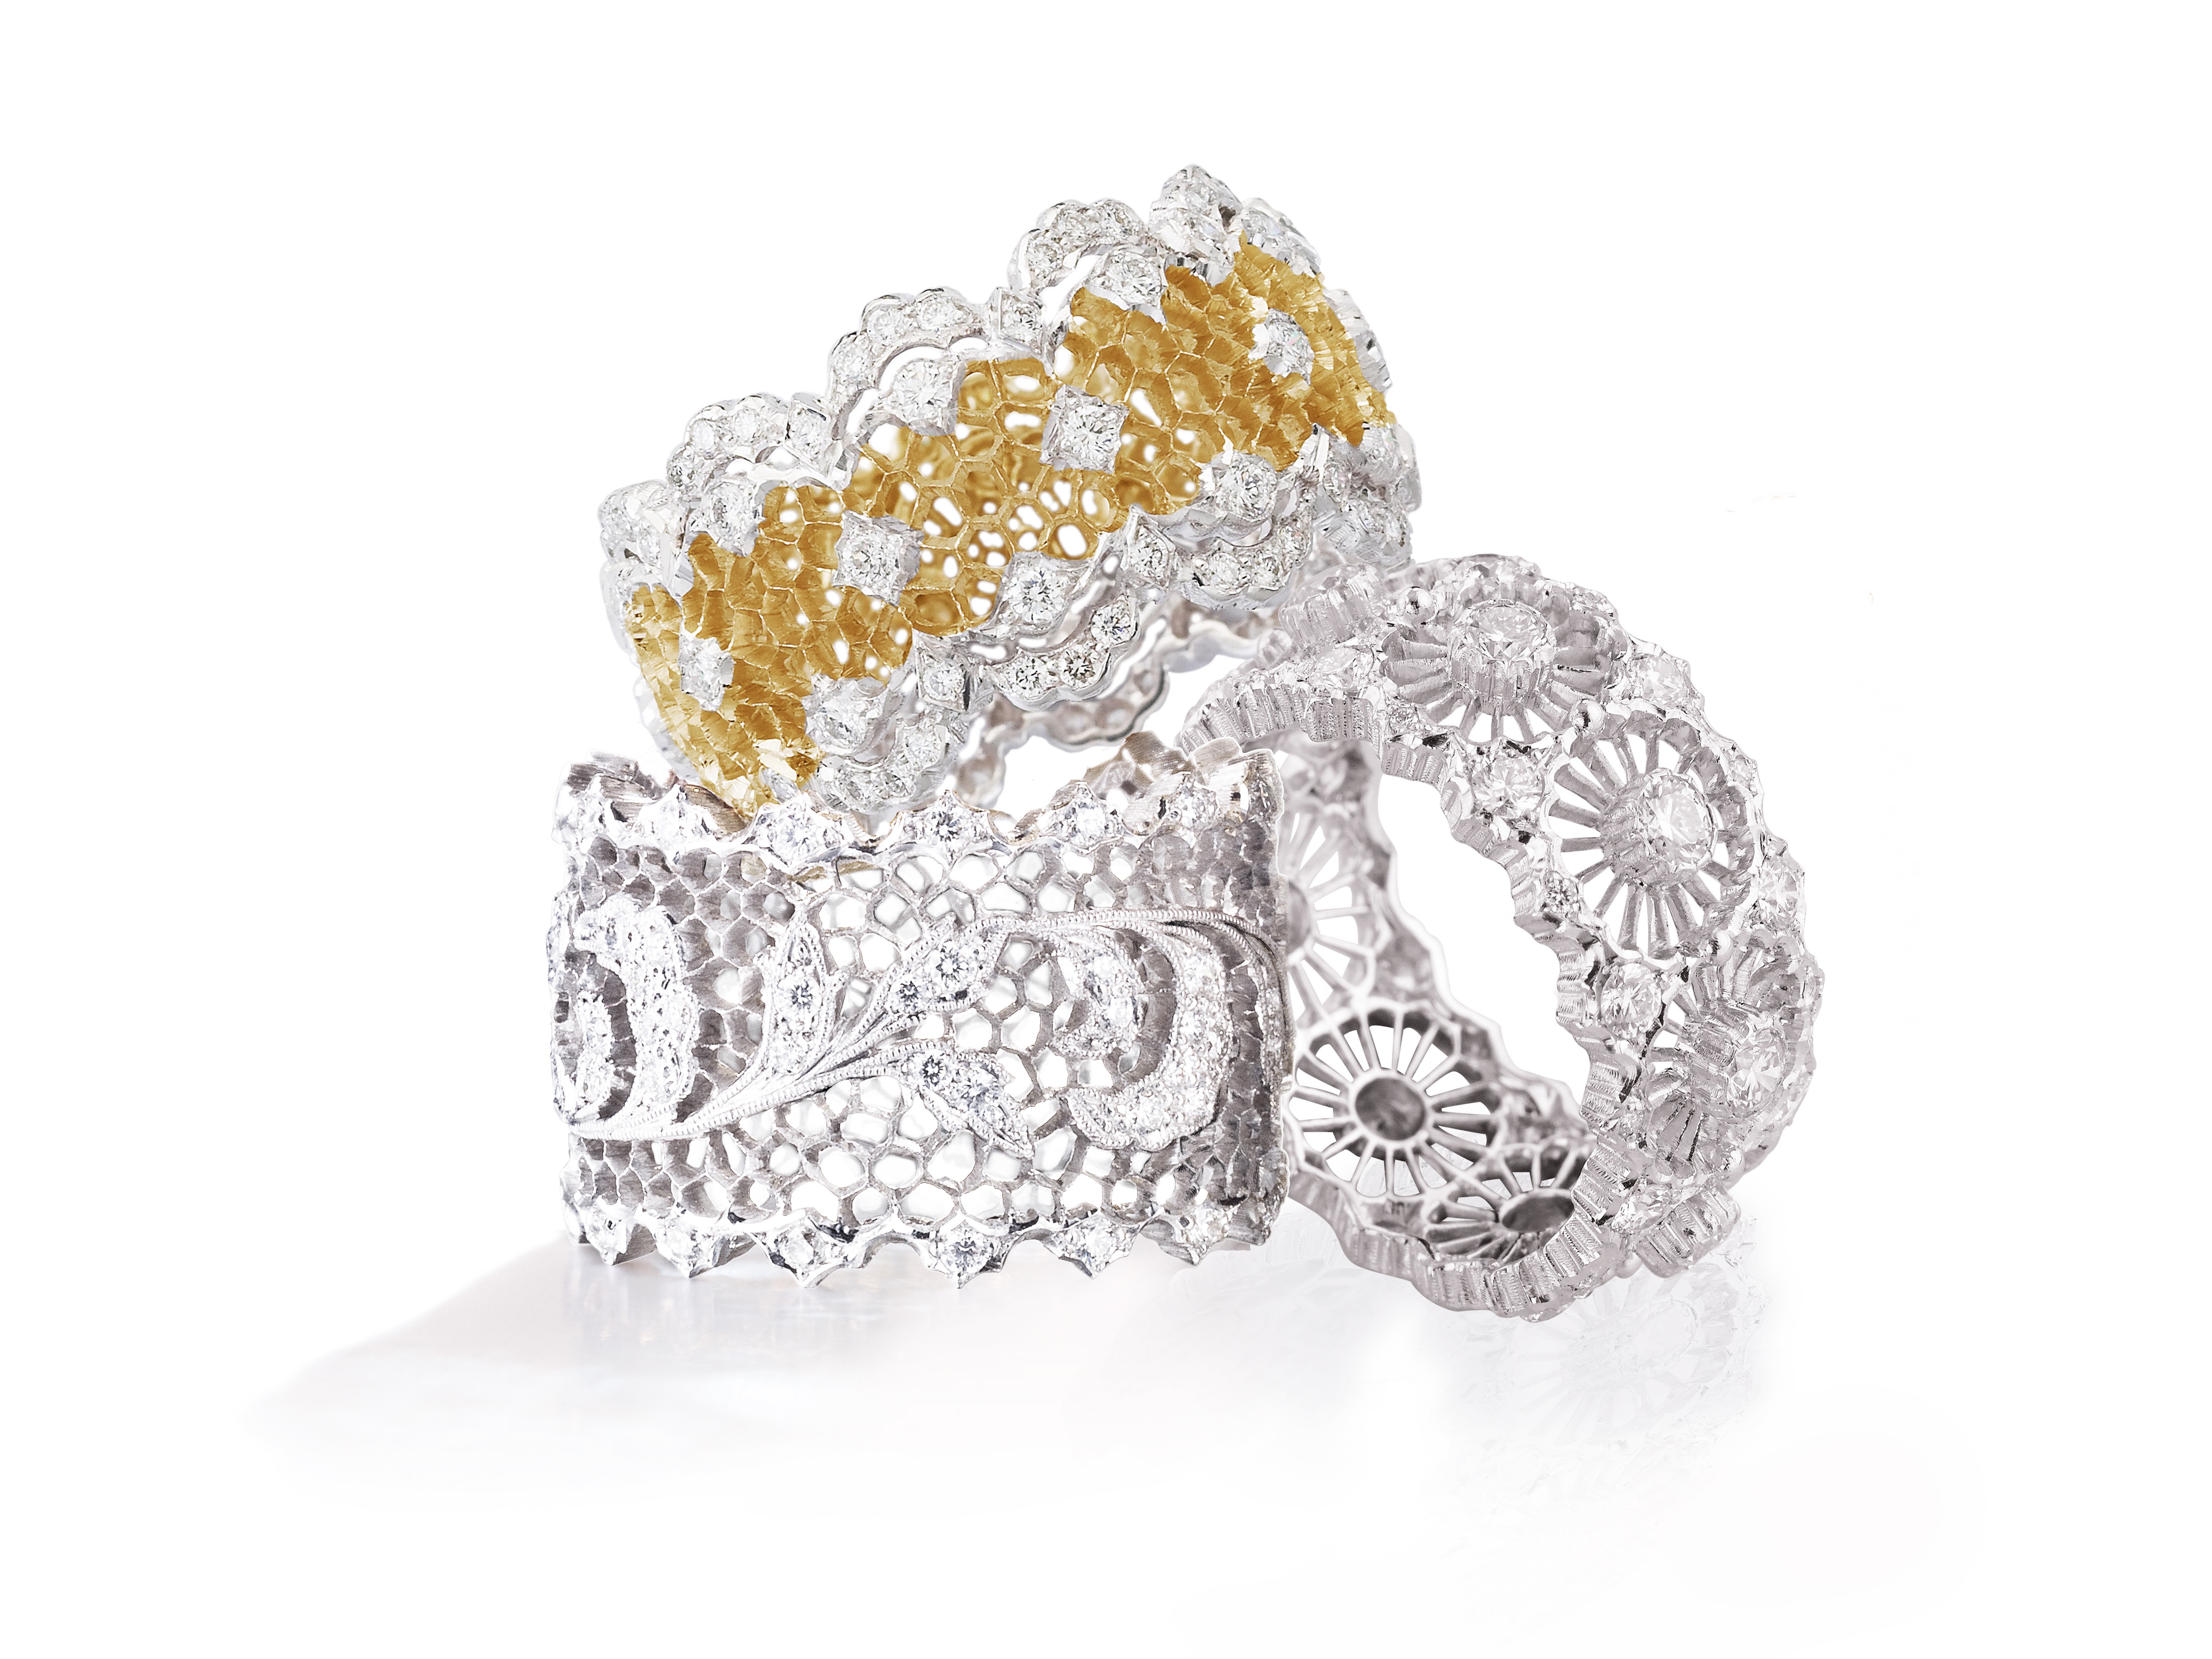 Buccellati accelerates expansion in China